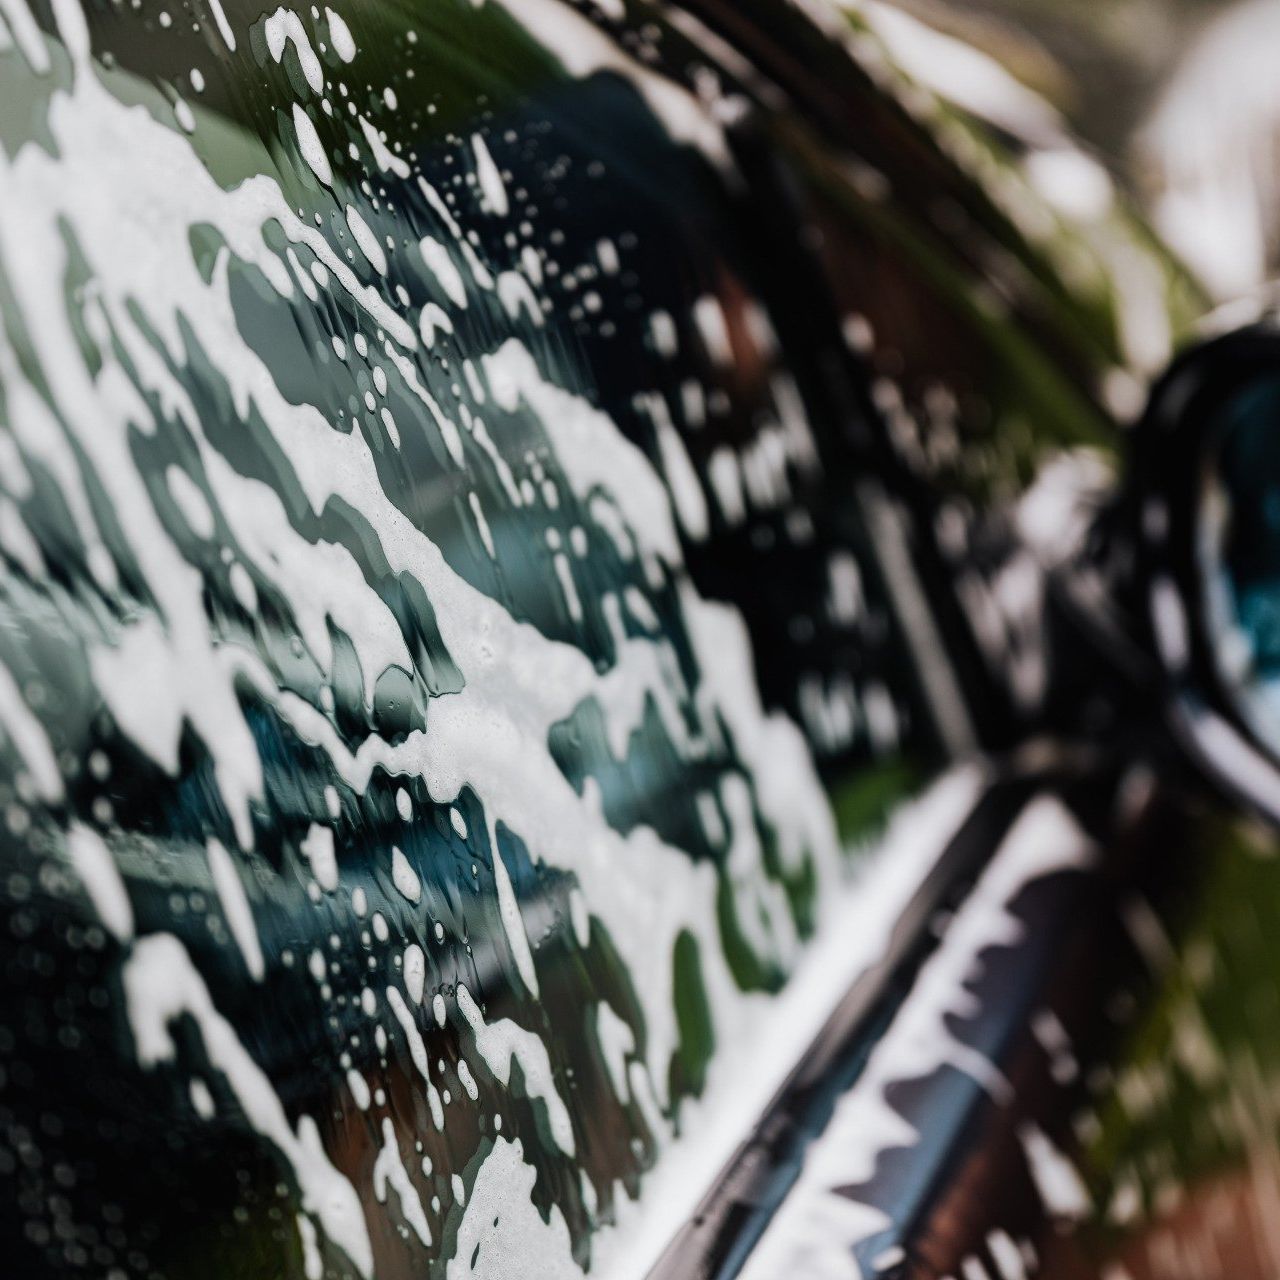 Glistening car covered in soap suds during a thorough wash.